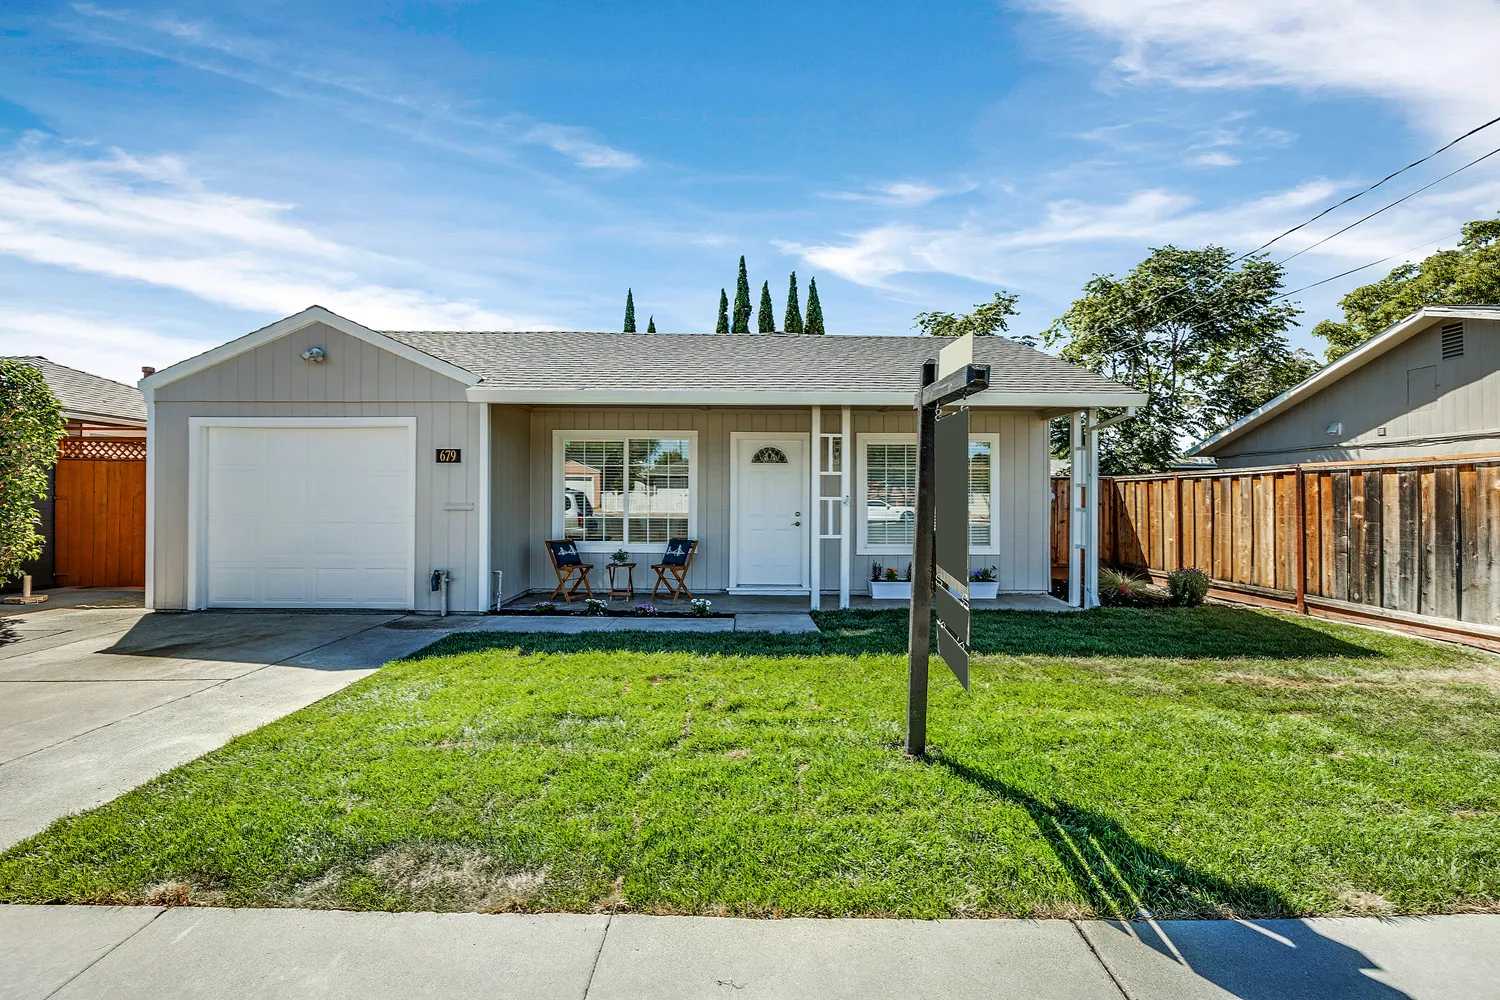 House in Livermore, 679 James Street 11503311